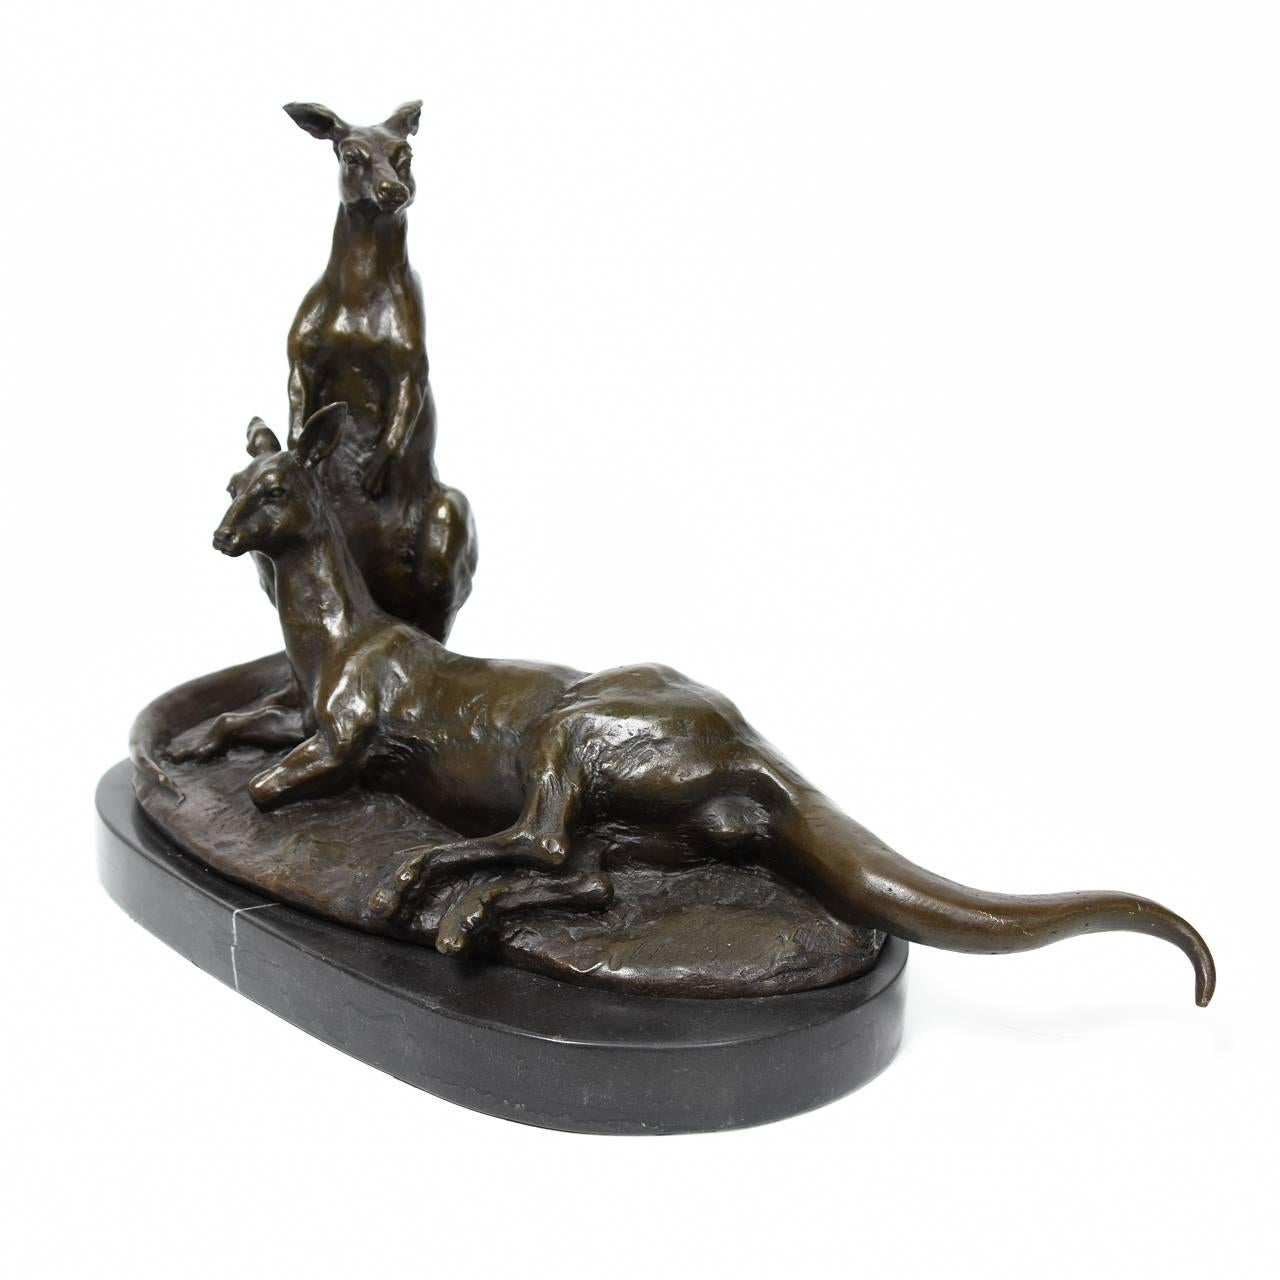 Bronze of a pair of Kangaroos, circa 2000
Kangaroos are seated in a relaxed pose on a marble base.
 